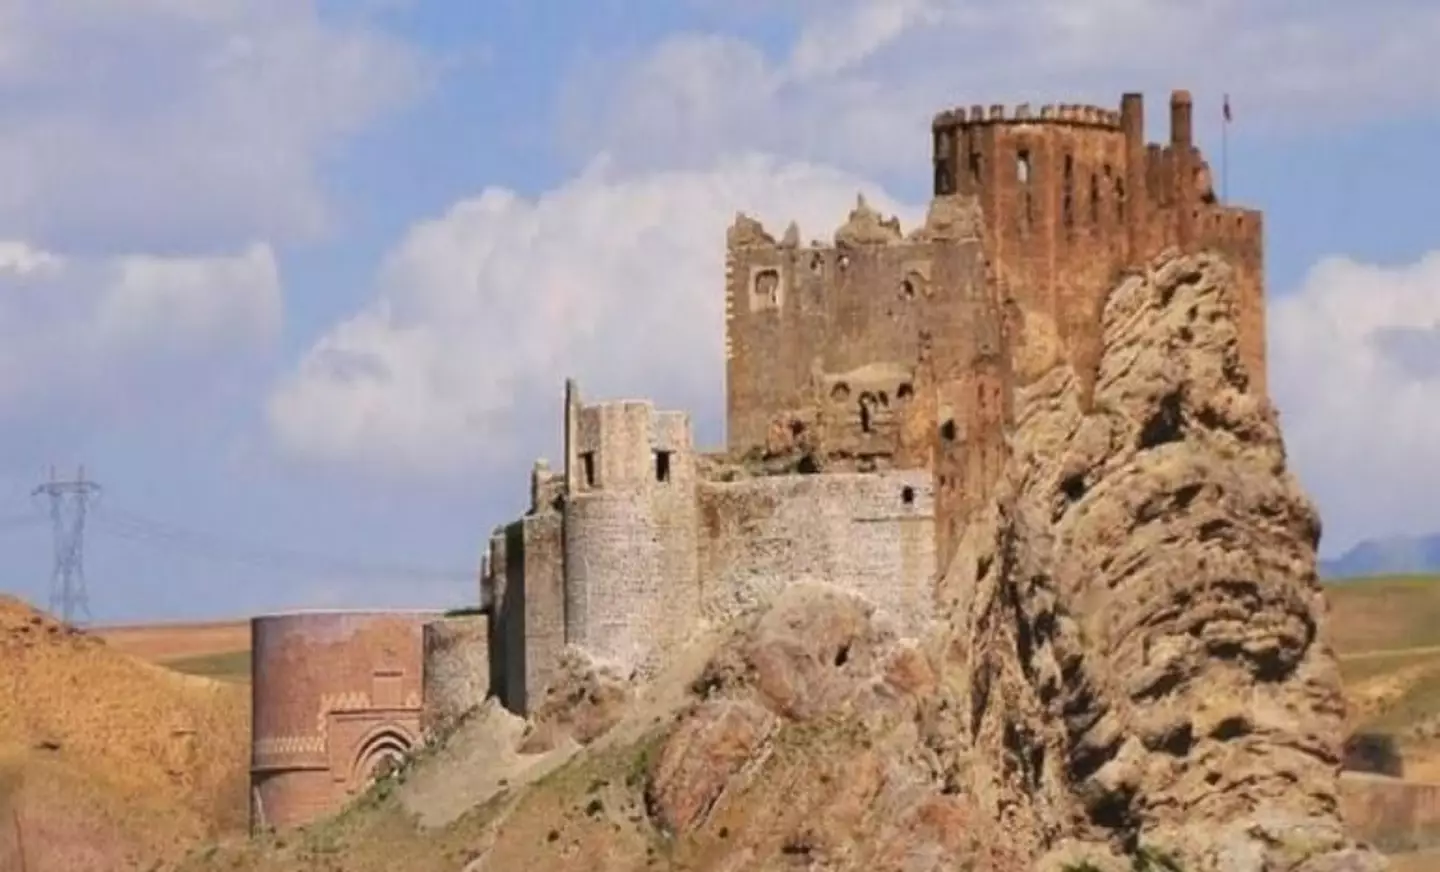 Remnants of the legendary Alamut Castle, the stronghold of Hassan i-Sabbah and his order of Assassins /